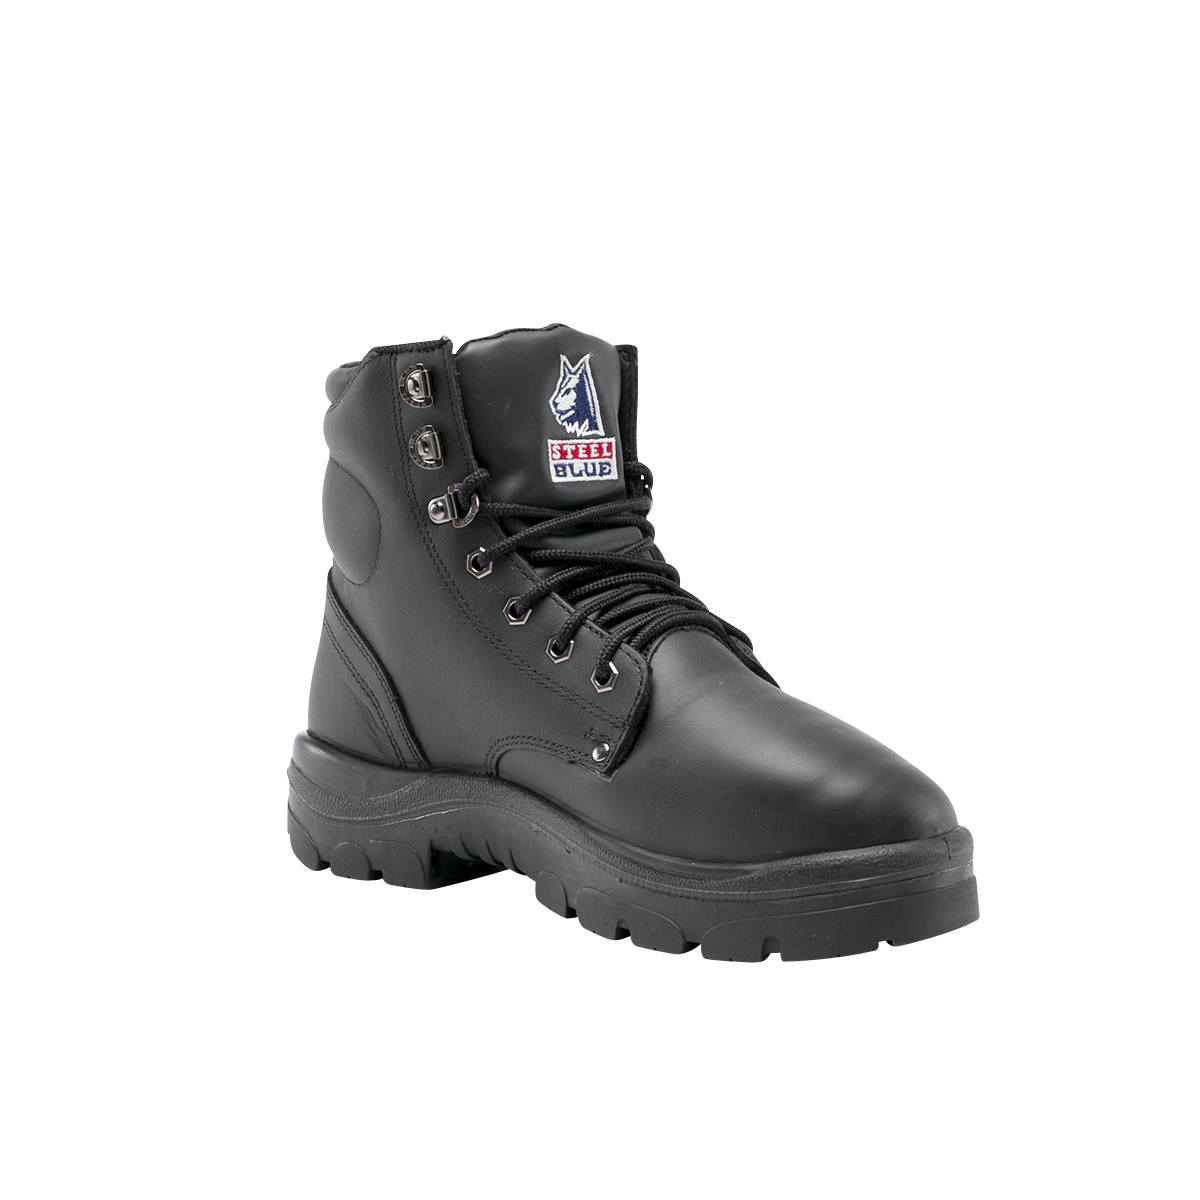 SAFETY BOOT ARGYLE MET SIZE 10 -ANKLE LACE UP BLACK TPU